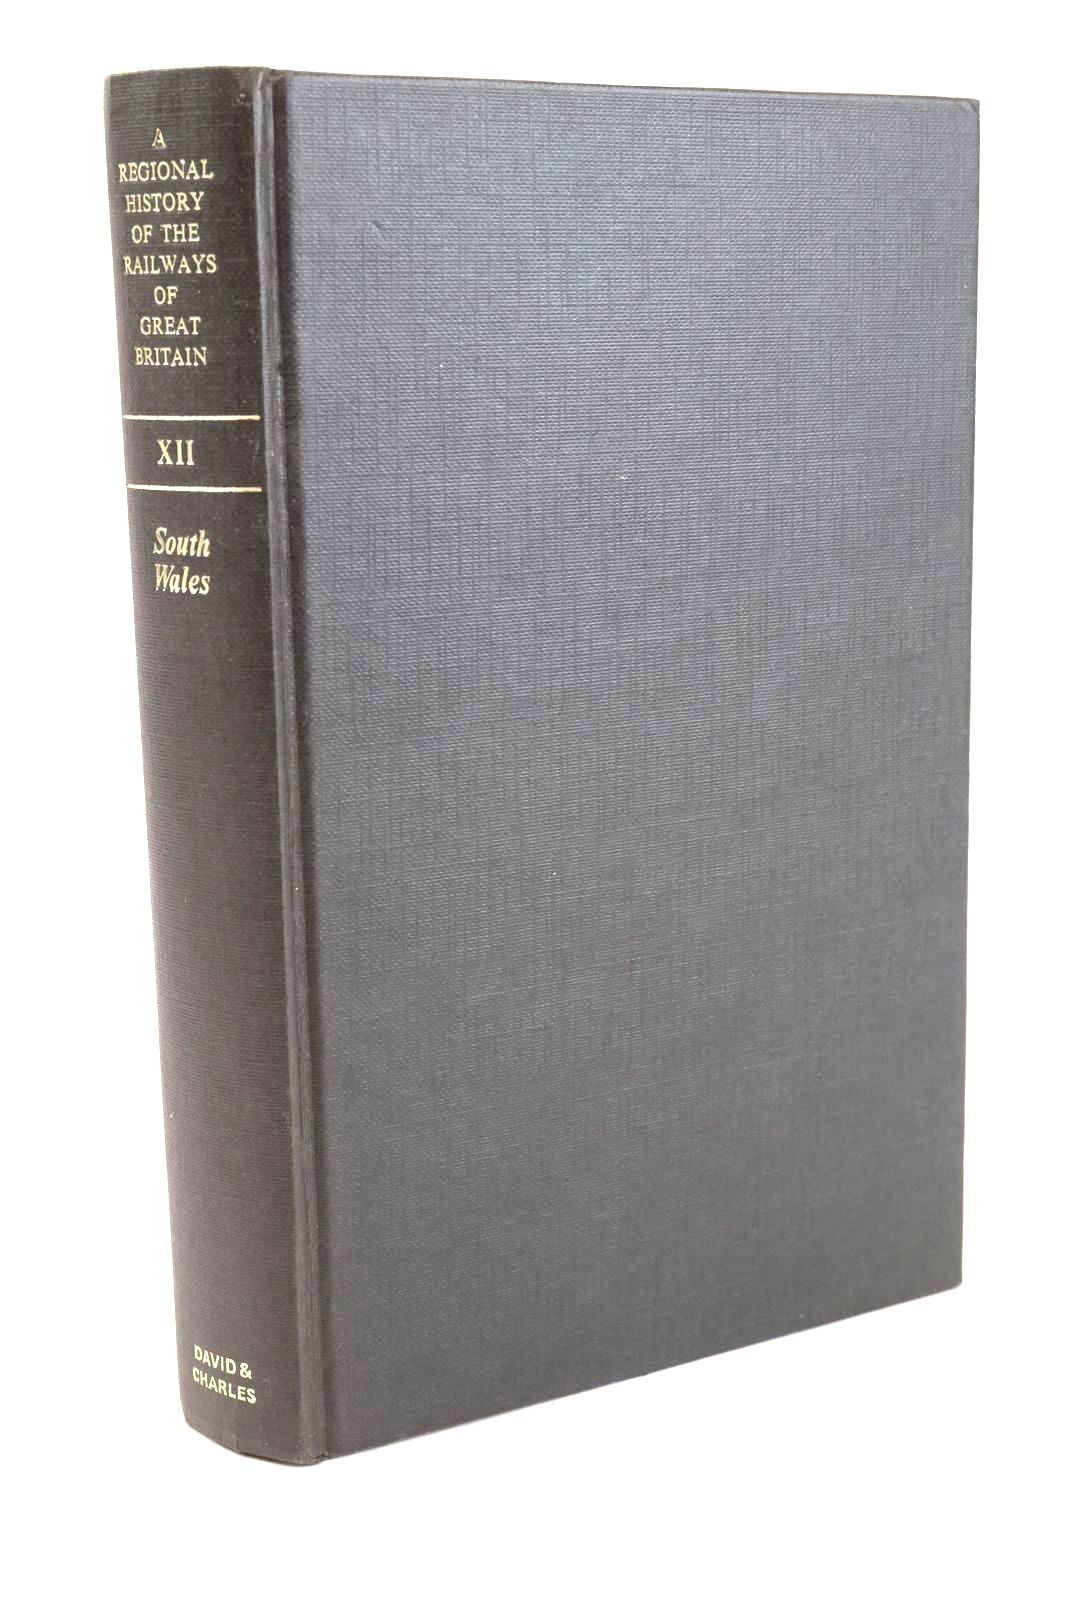 Photo of A REGIONAL HISTORY OF THE RAILWAYS OF GREAT BRITAIN VOLUME XII SOUTH WALES- Stock Number: 1327158